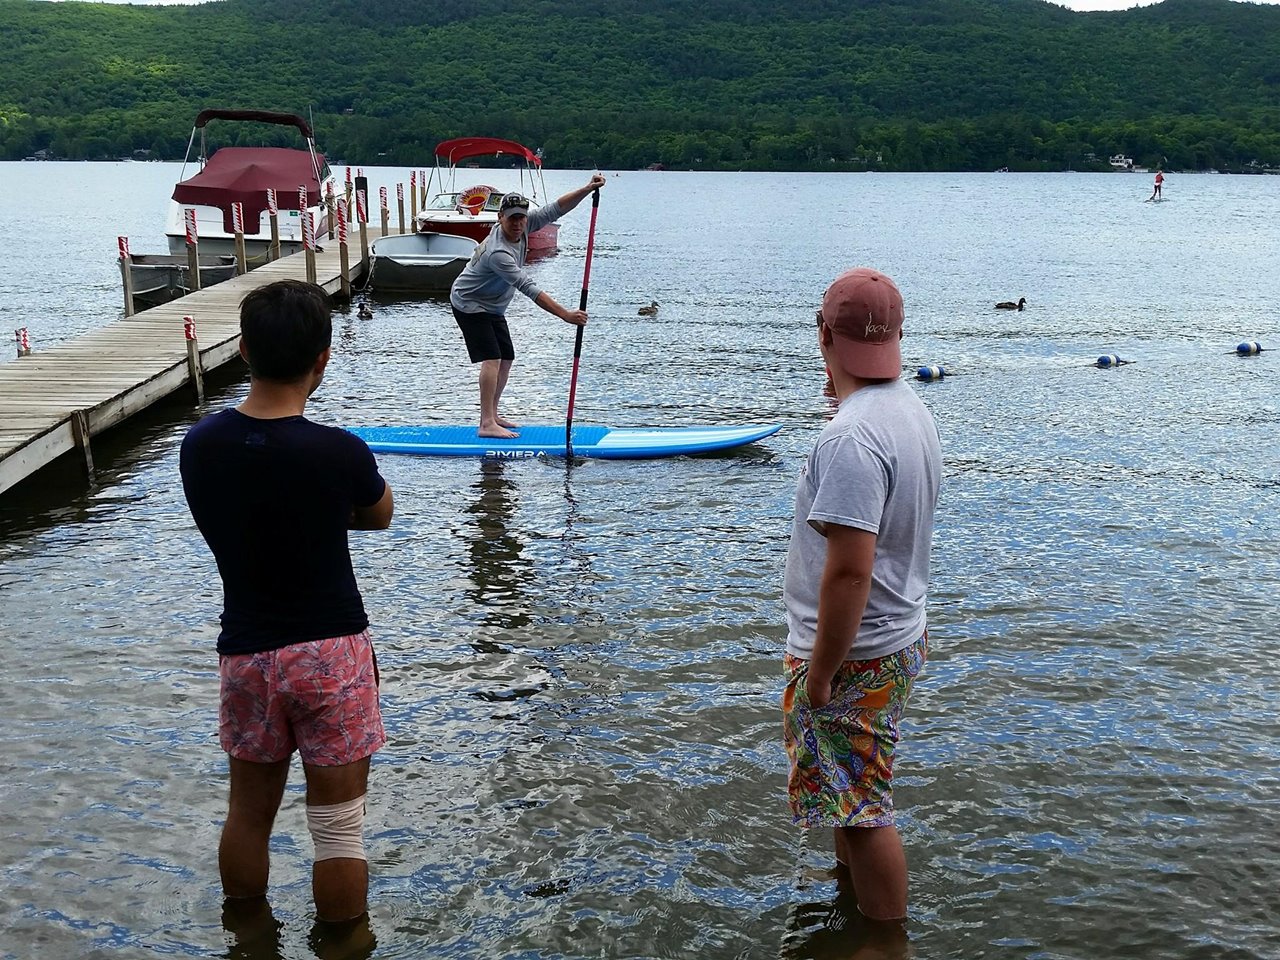 Two men watching person on stand up paddleboard.